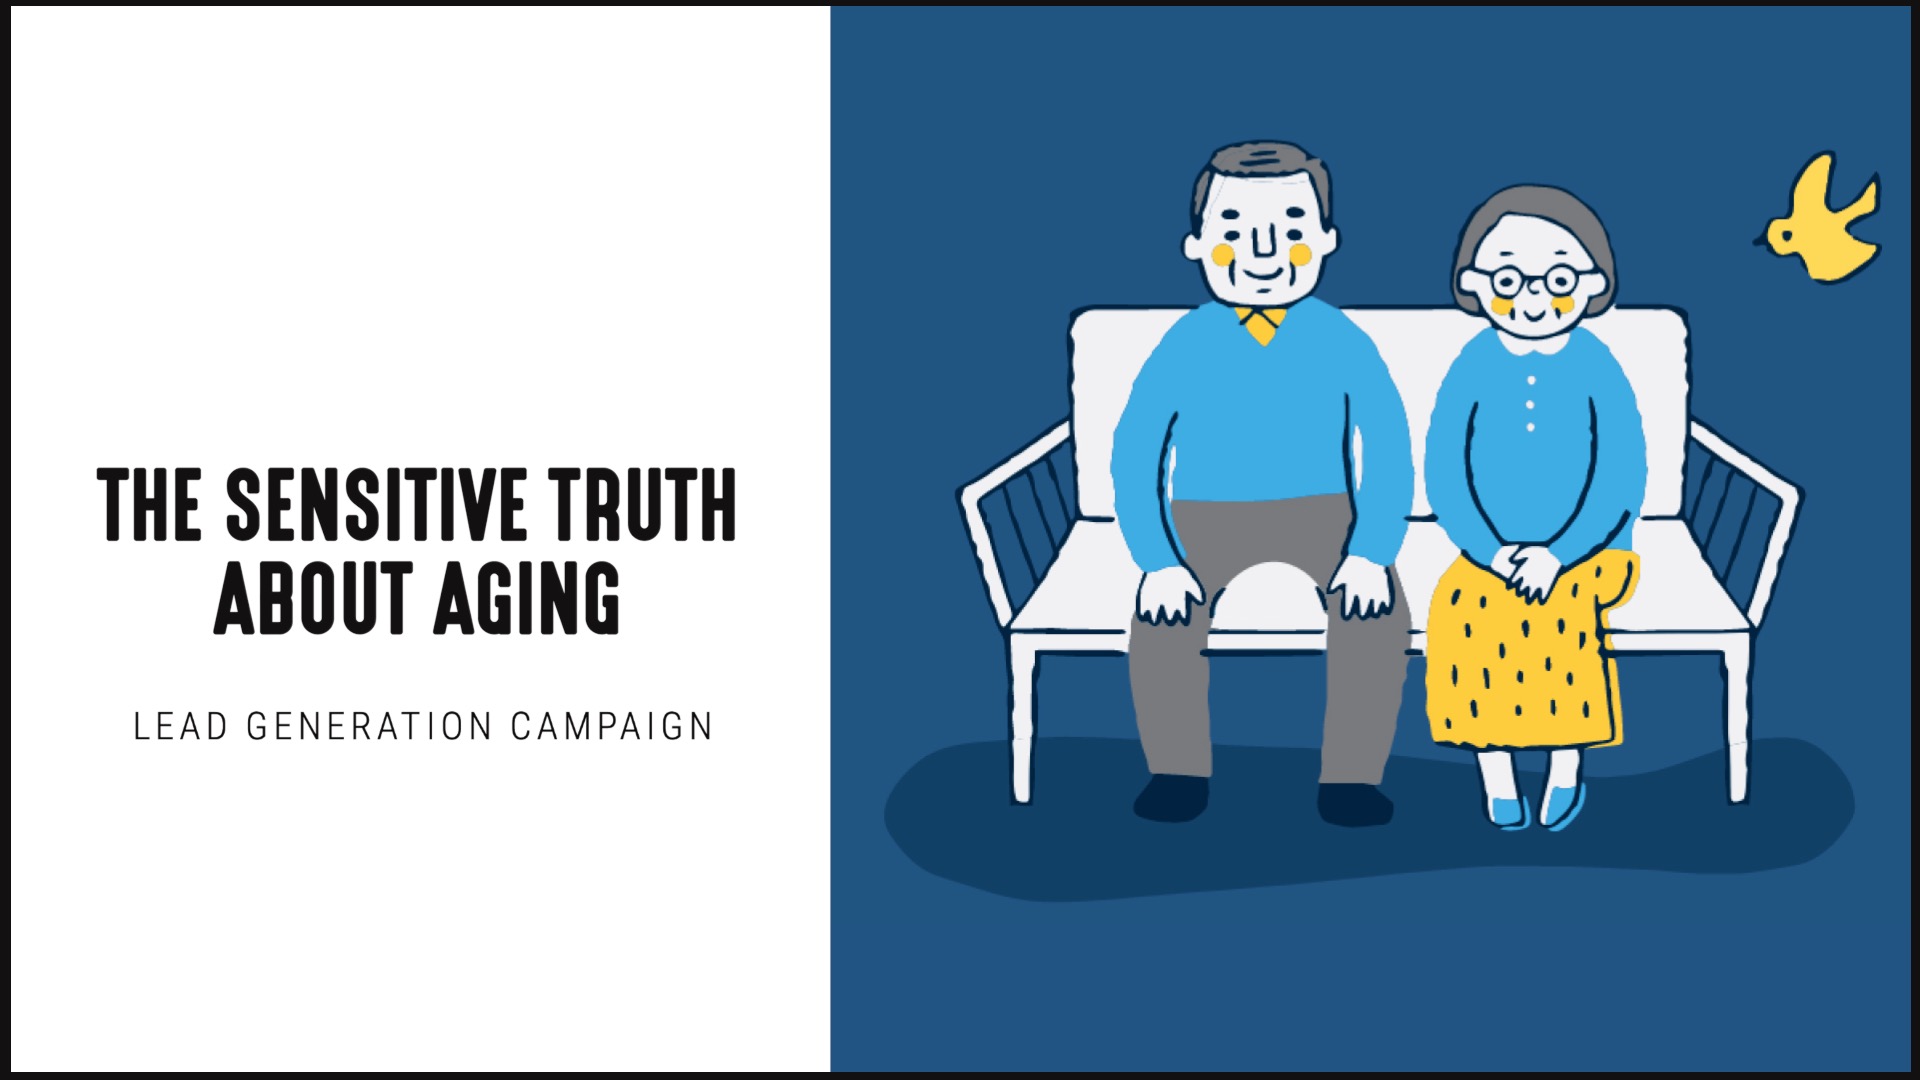 [NEW] Lead Gen Campaign | The Sensitive Truth About Aging